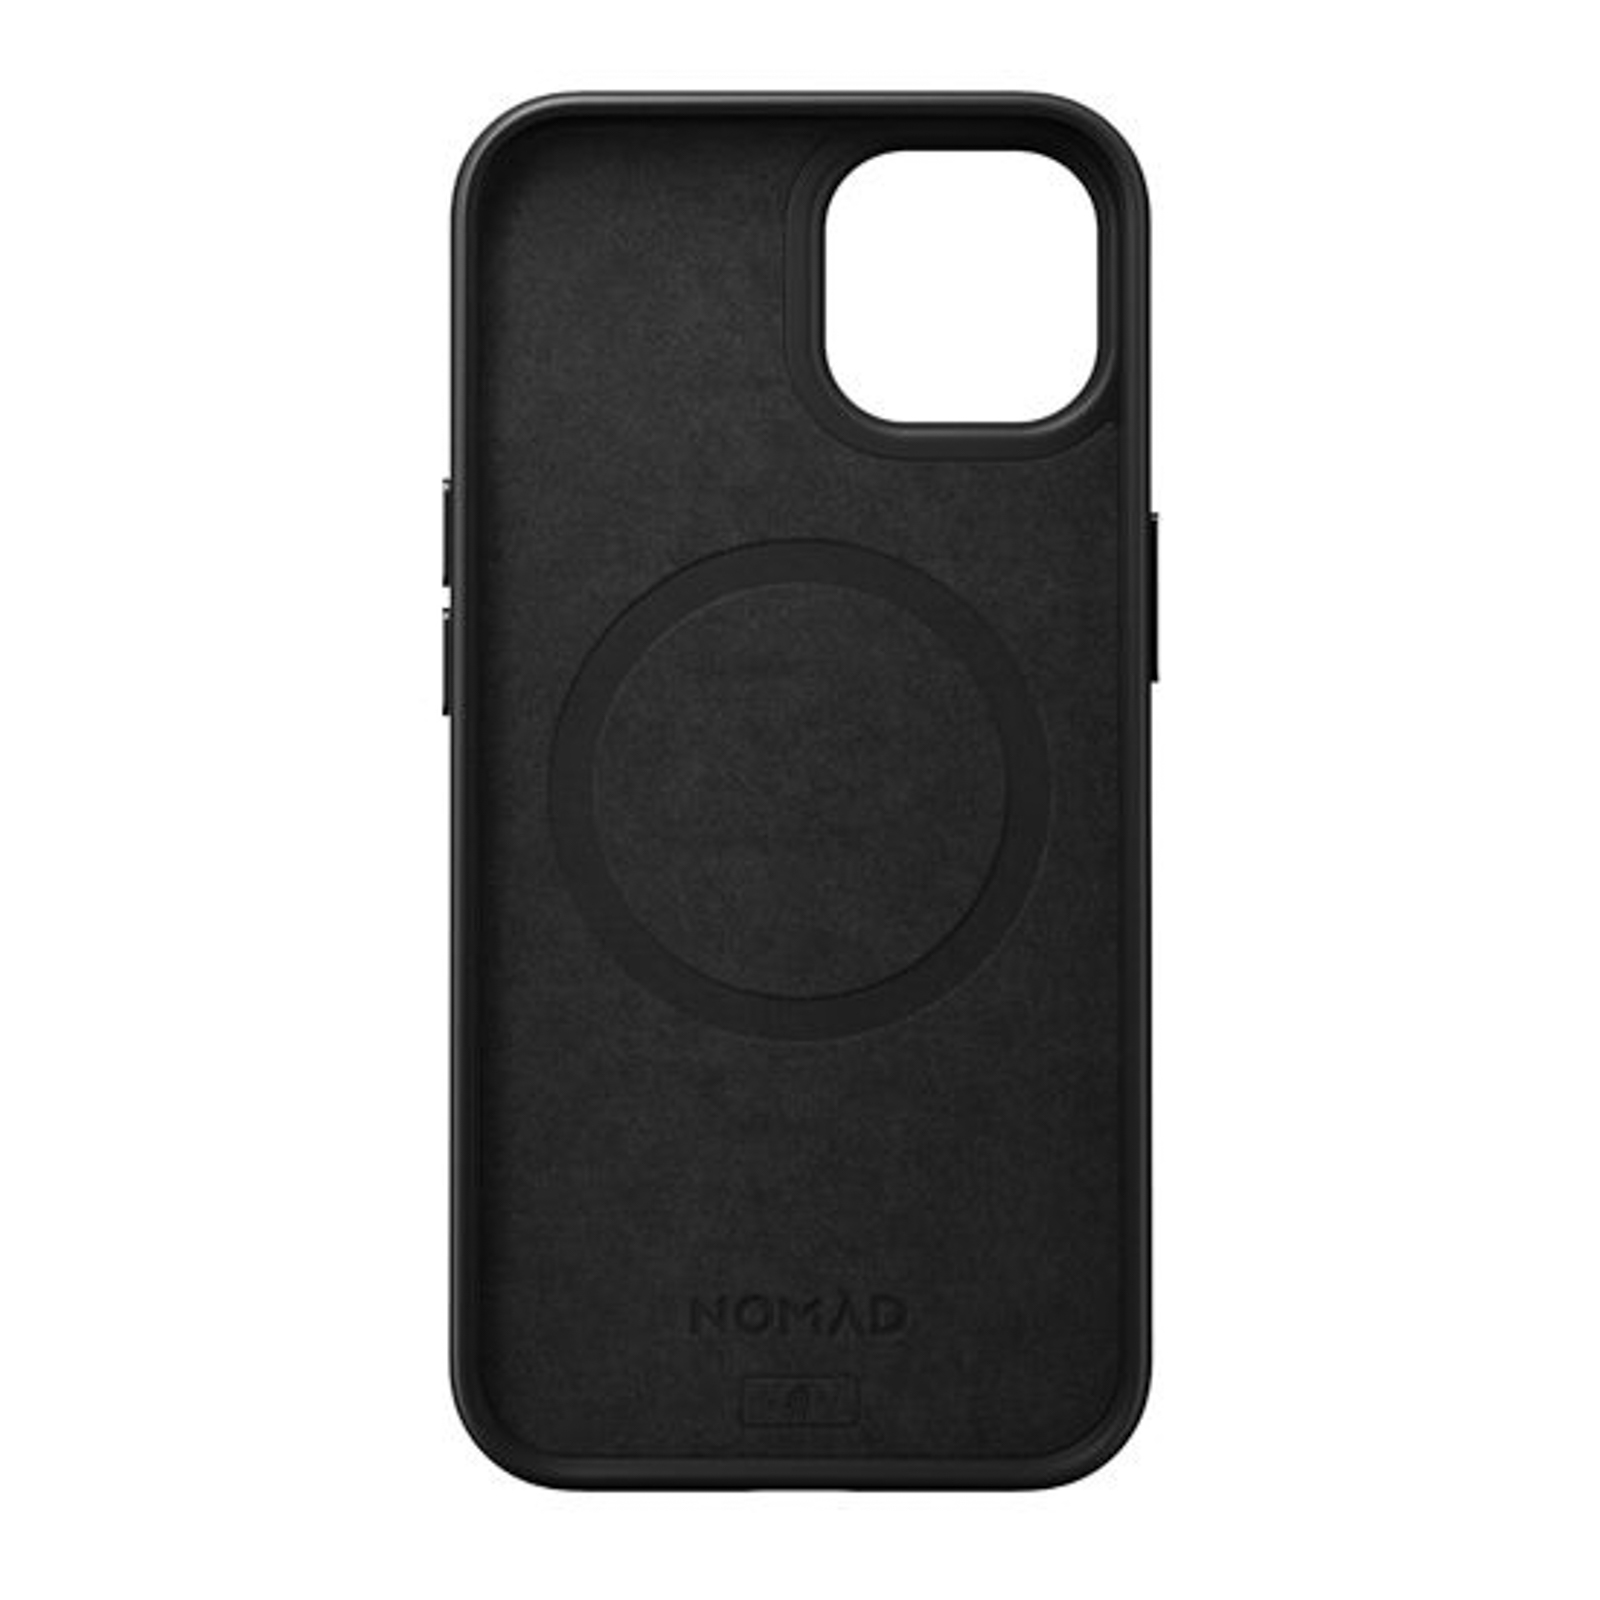 Braun Apple, iPhone Backcover, Lux 13, Series, NOMAD